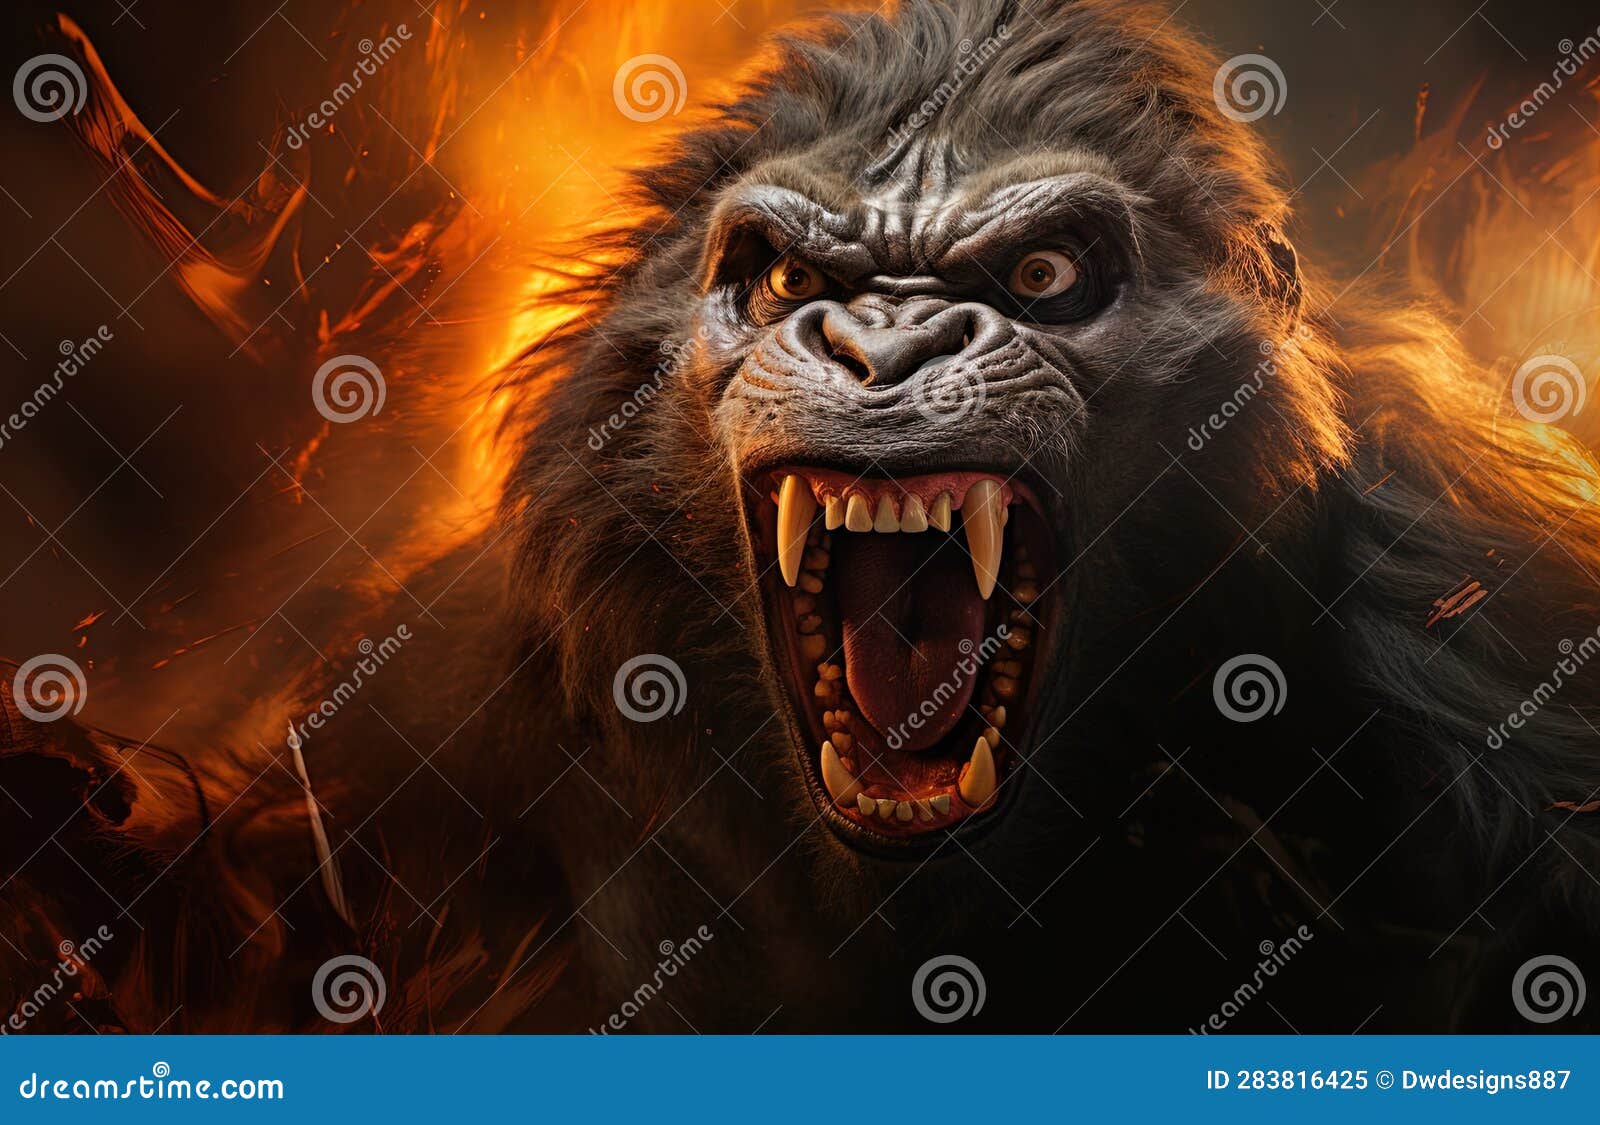 A Mighty Gorilla Roars and Shows His Fangs. Stock Illustration ...